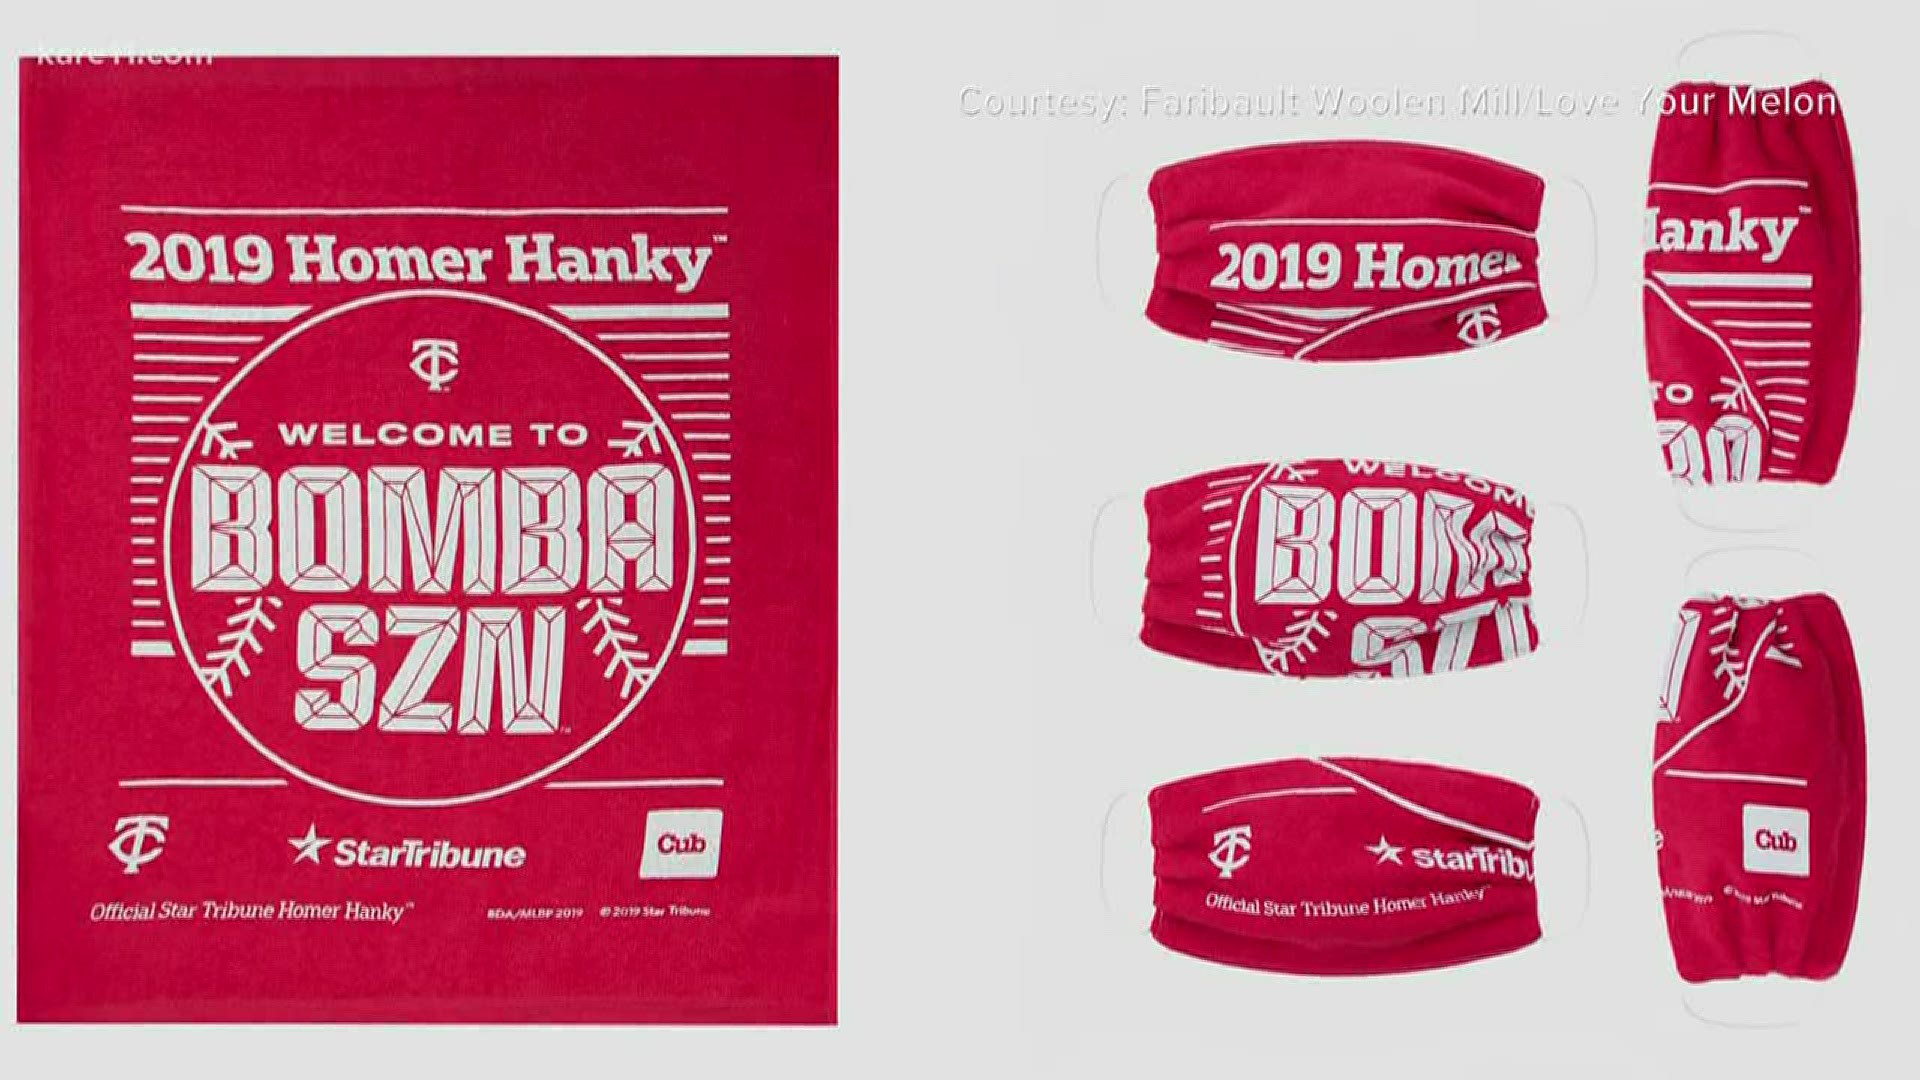 The Twins are teaming up with Star Tribune and Cub Foods to repurpose the 2019 Bomba SZN towels as face coverings.